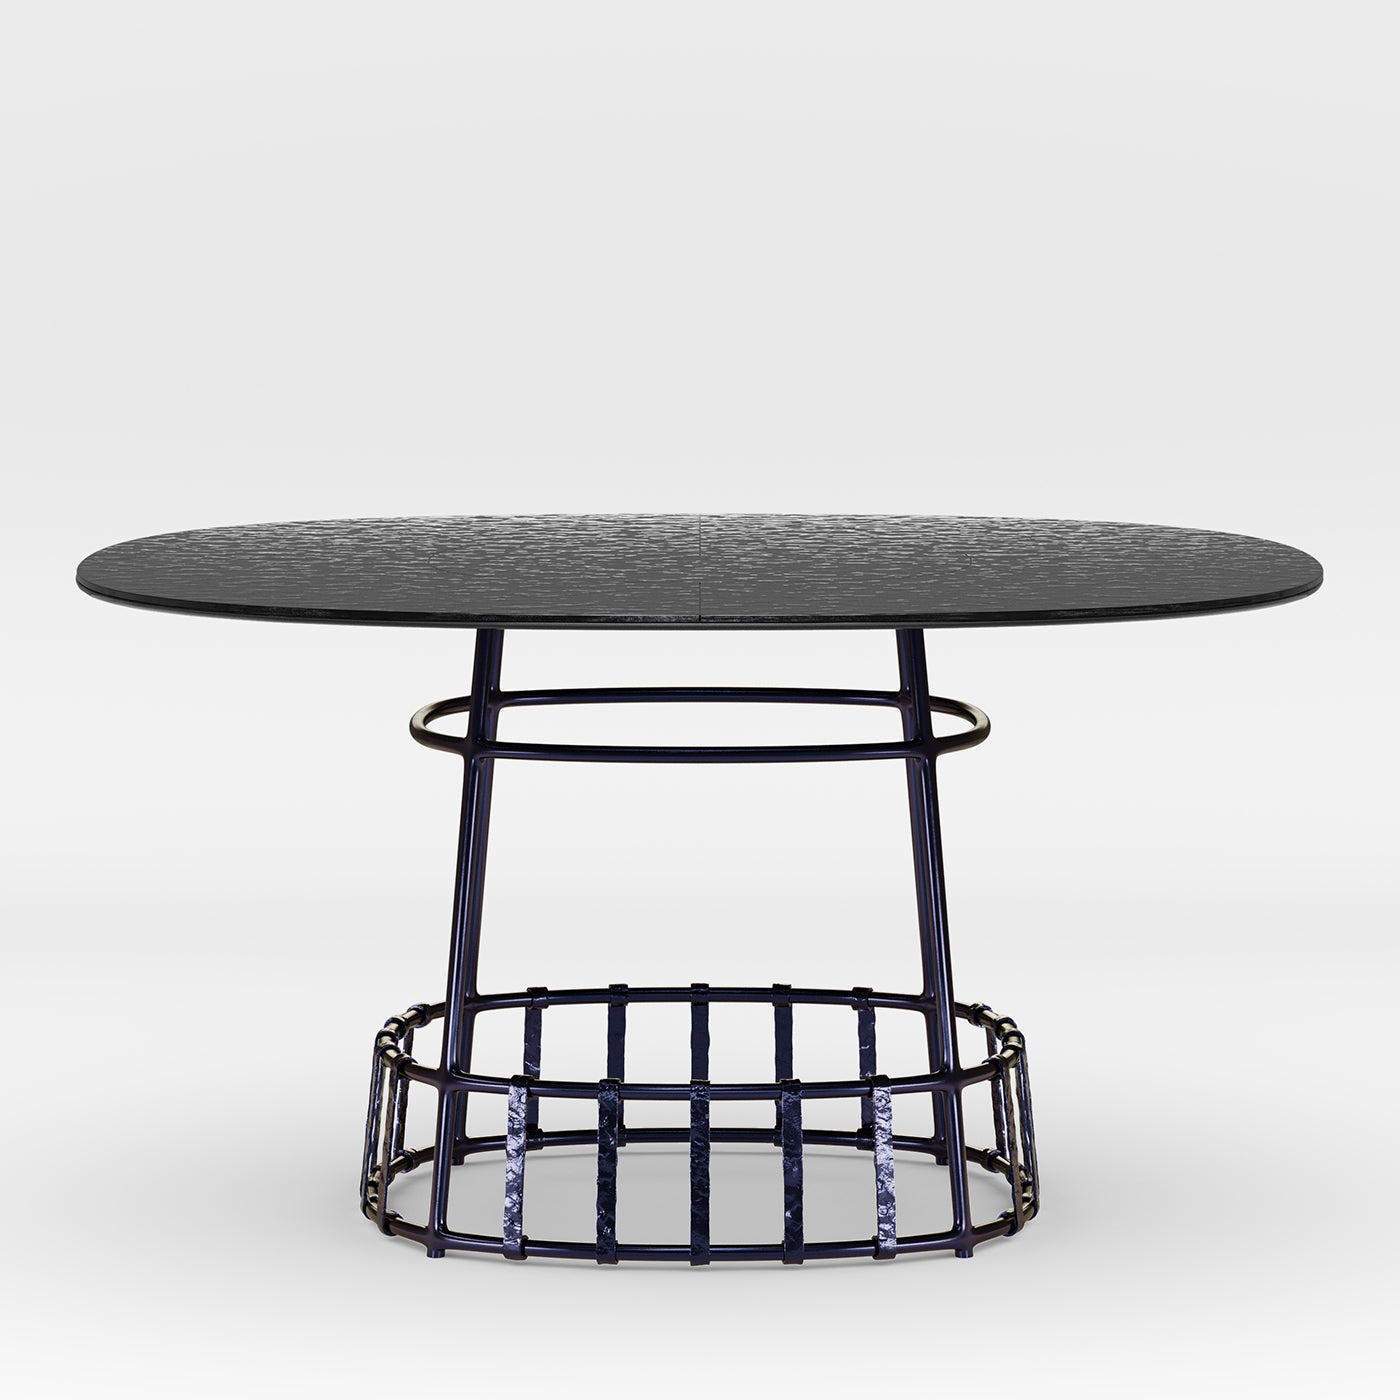 Dolmen Square Dining Table by Margherita Rui - Alternative view 3